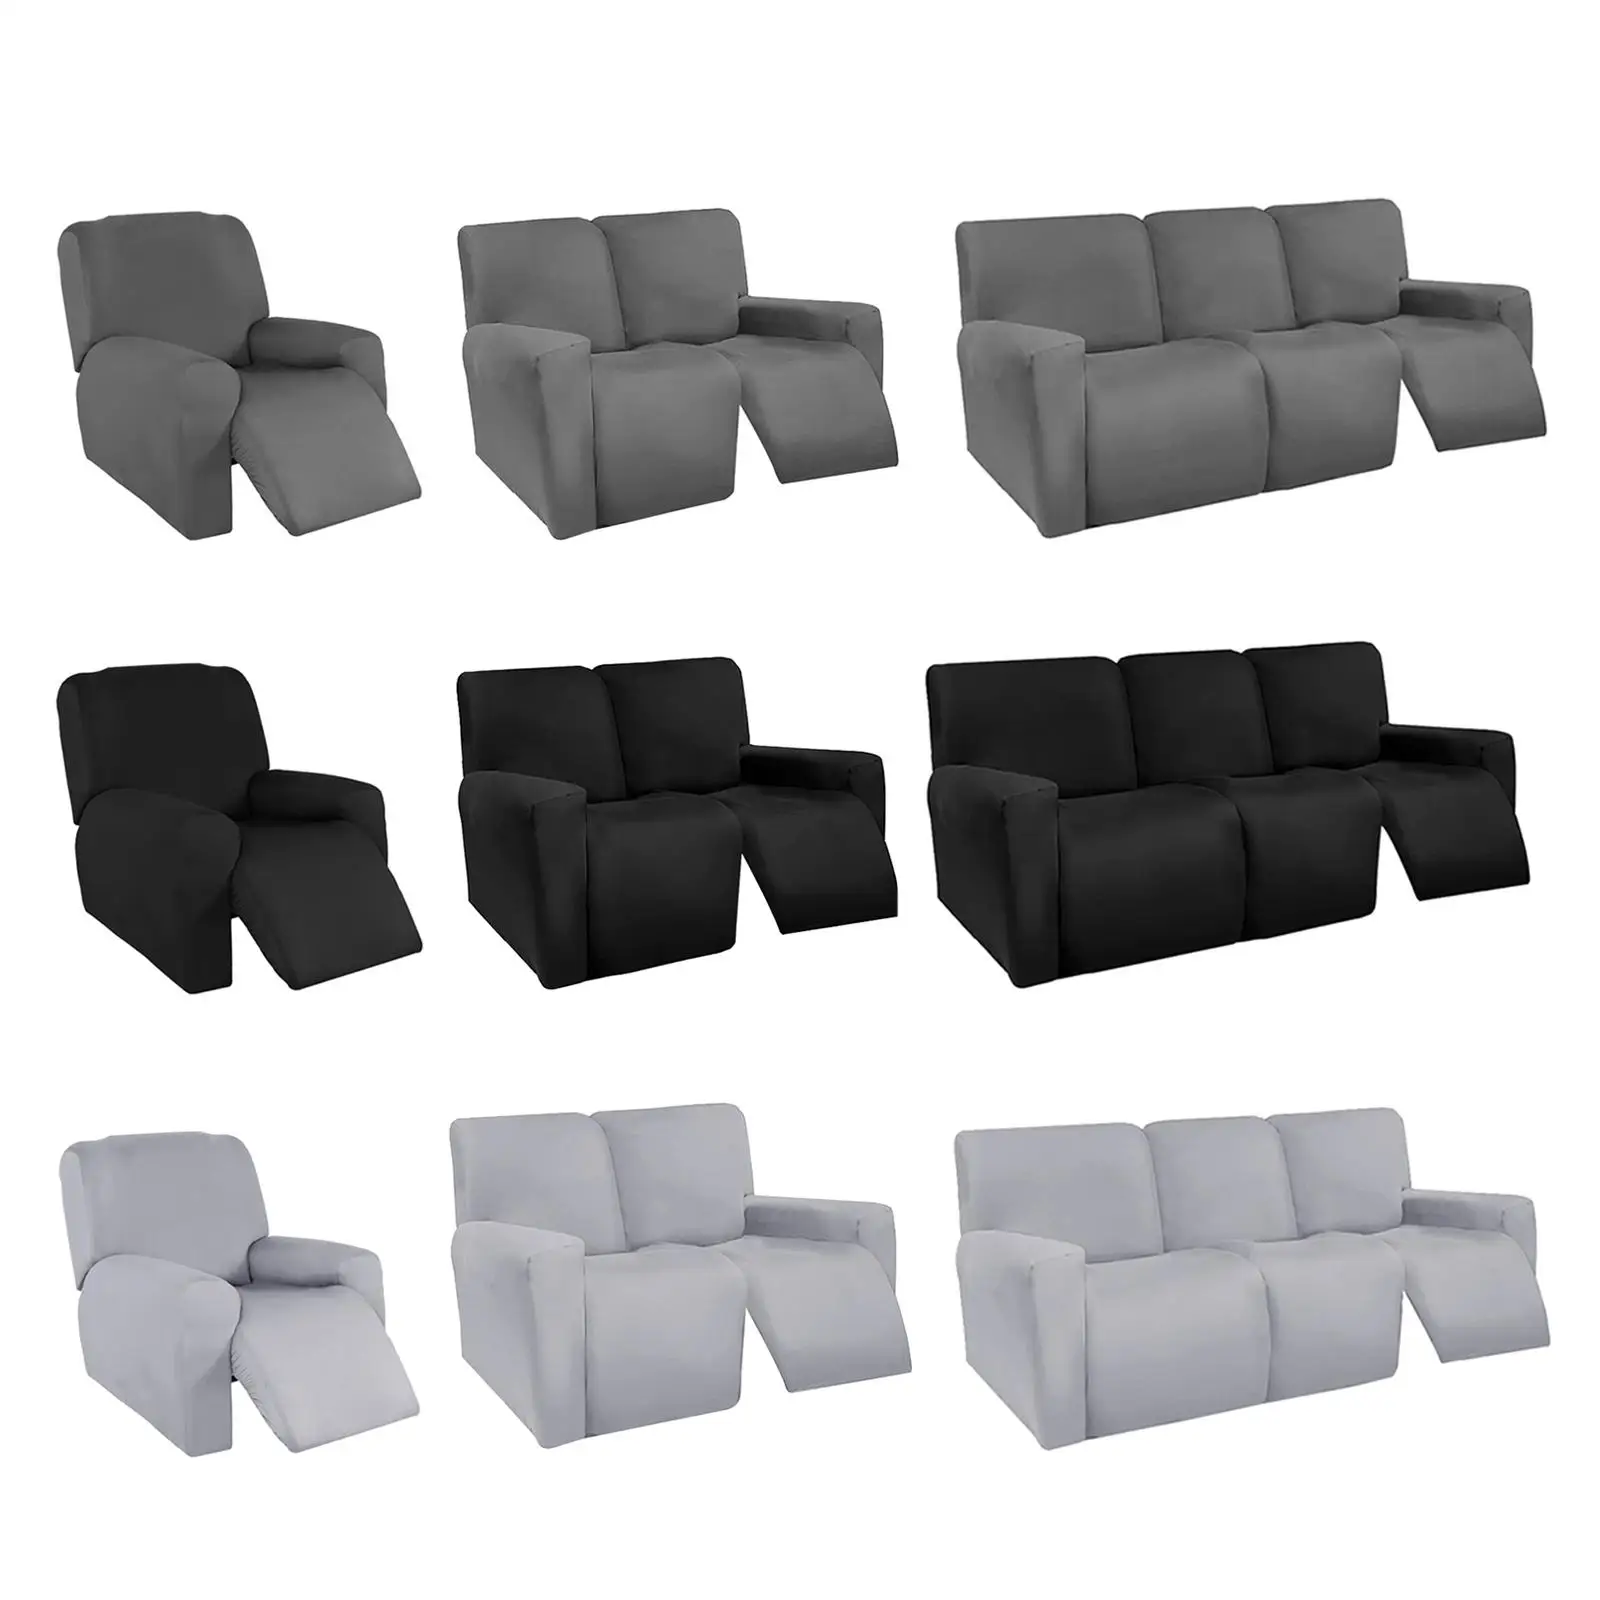 

Stretch recliner Sofa Covers Soft Furniture Protector Washable with Elastic Easy-Going Sofa Slipcover for Kids Cushion Couch